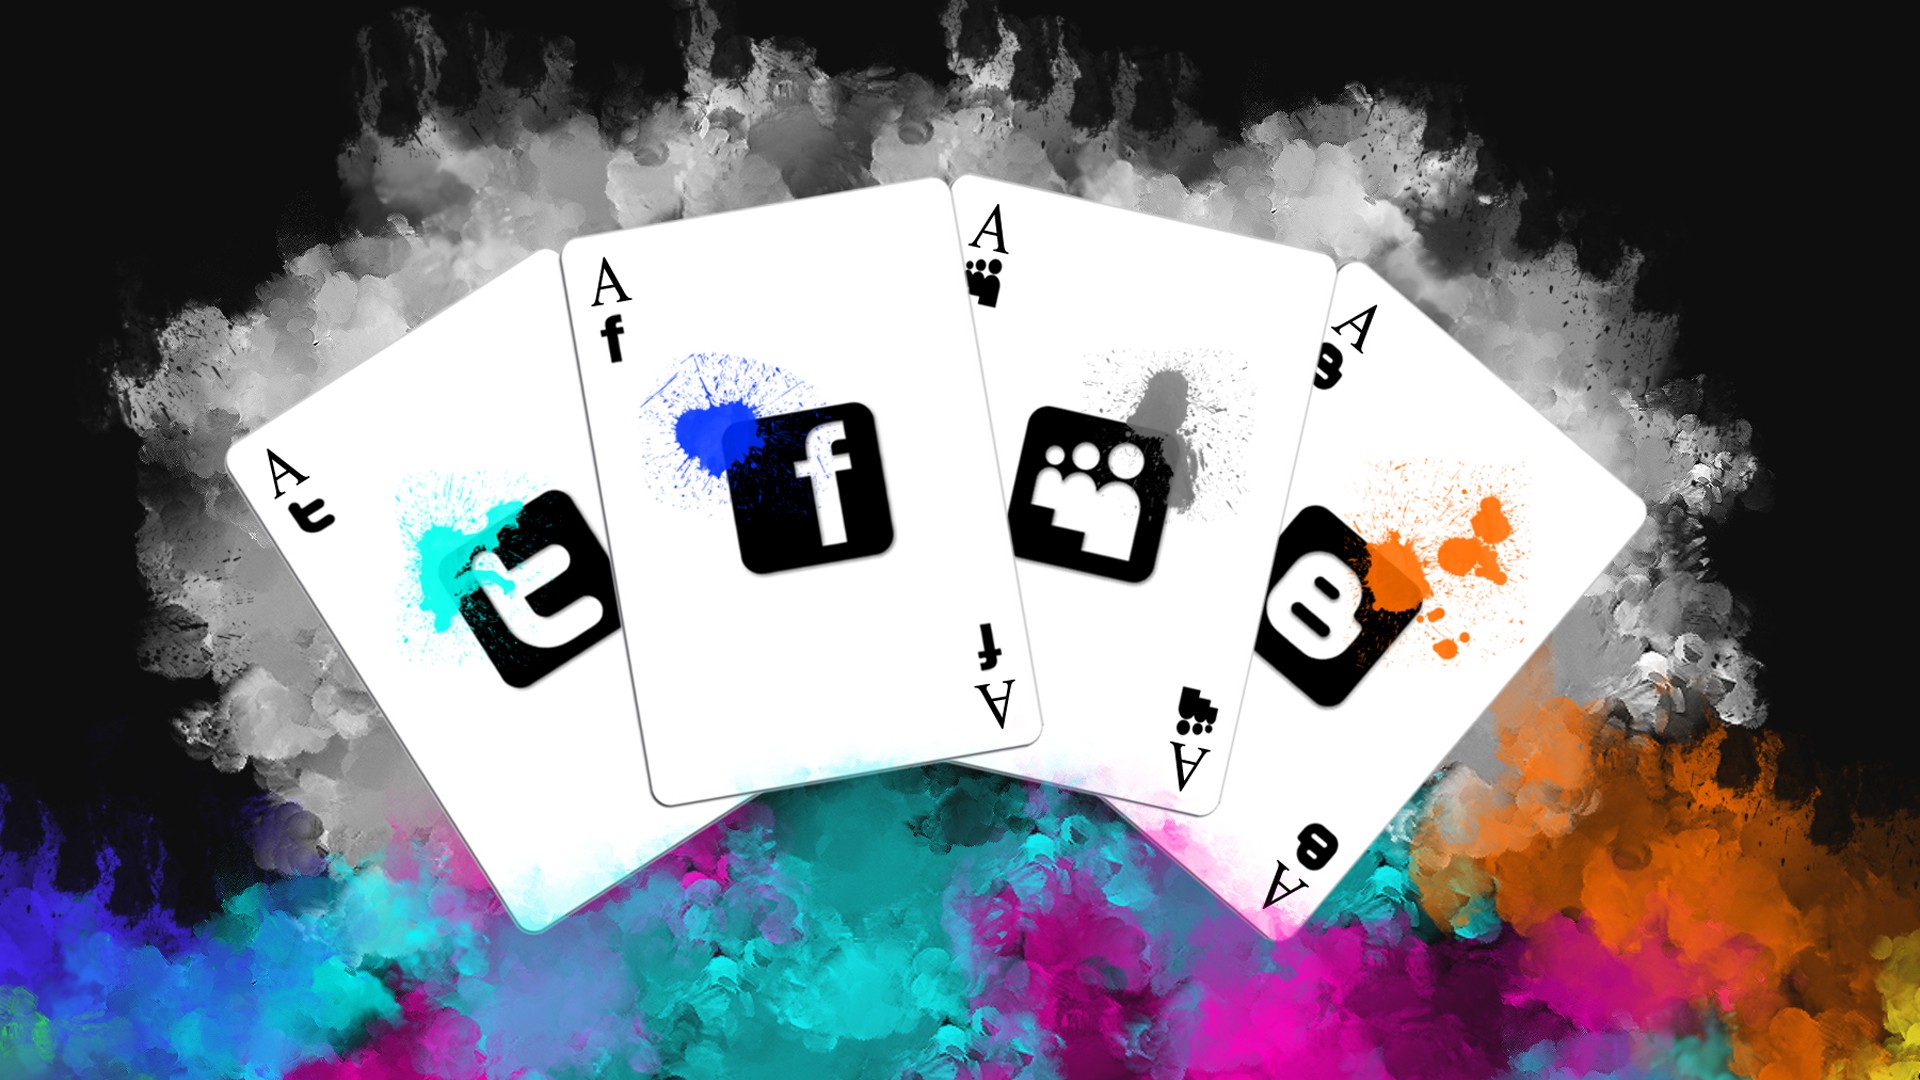 Network Aces Wallpapers Social Network Aces Myspace Backgrounds